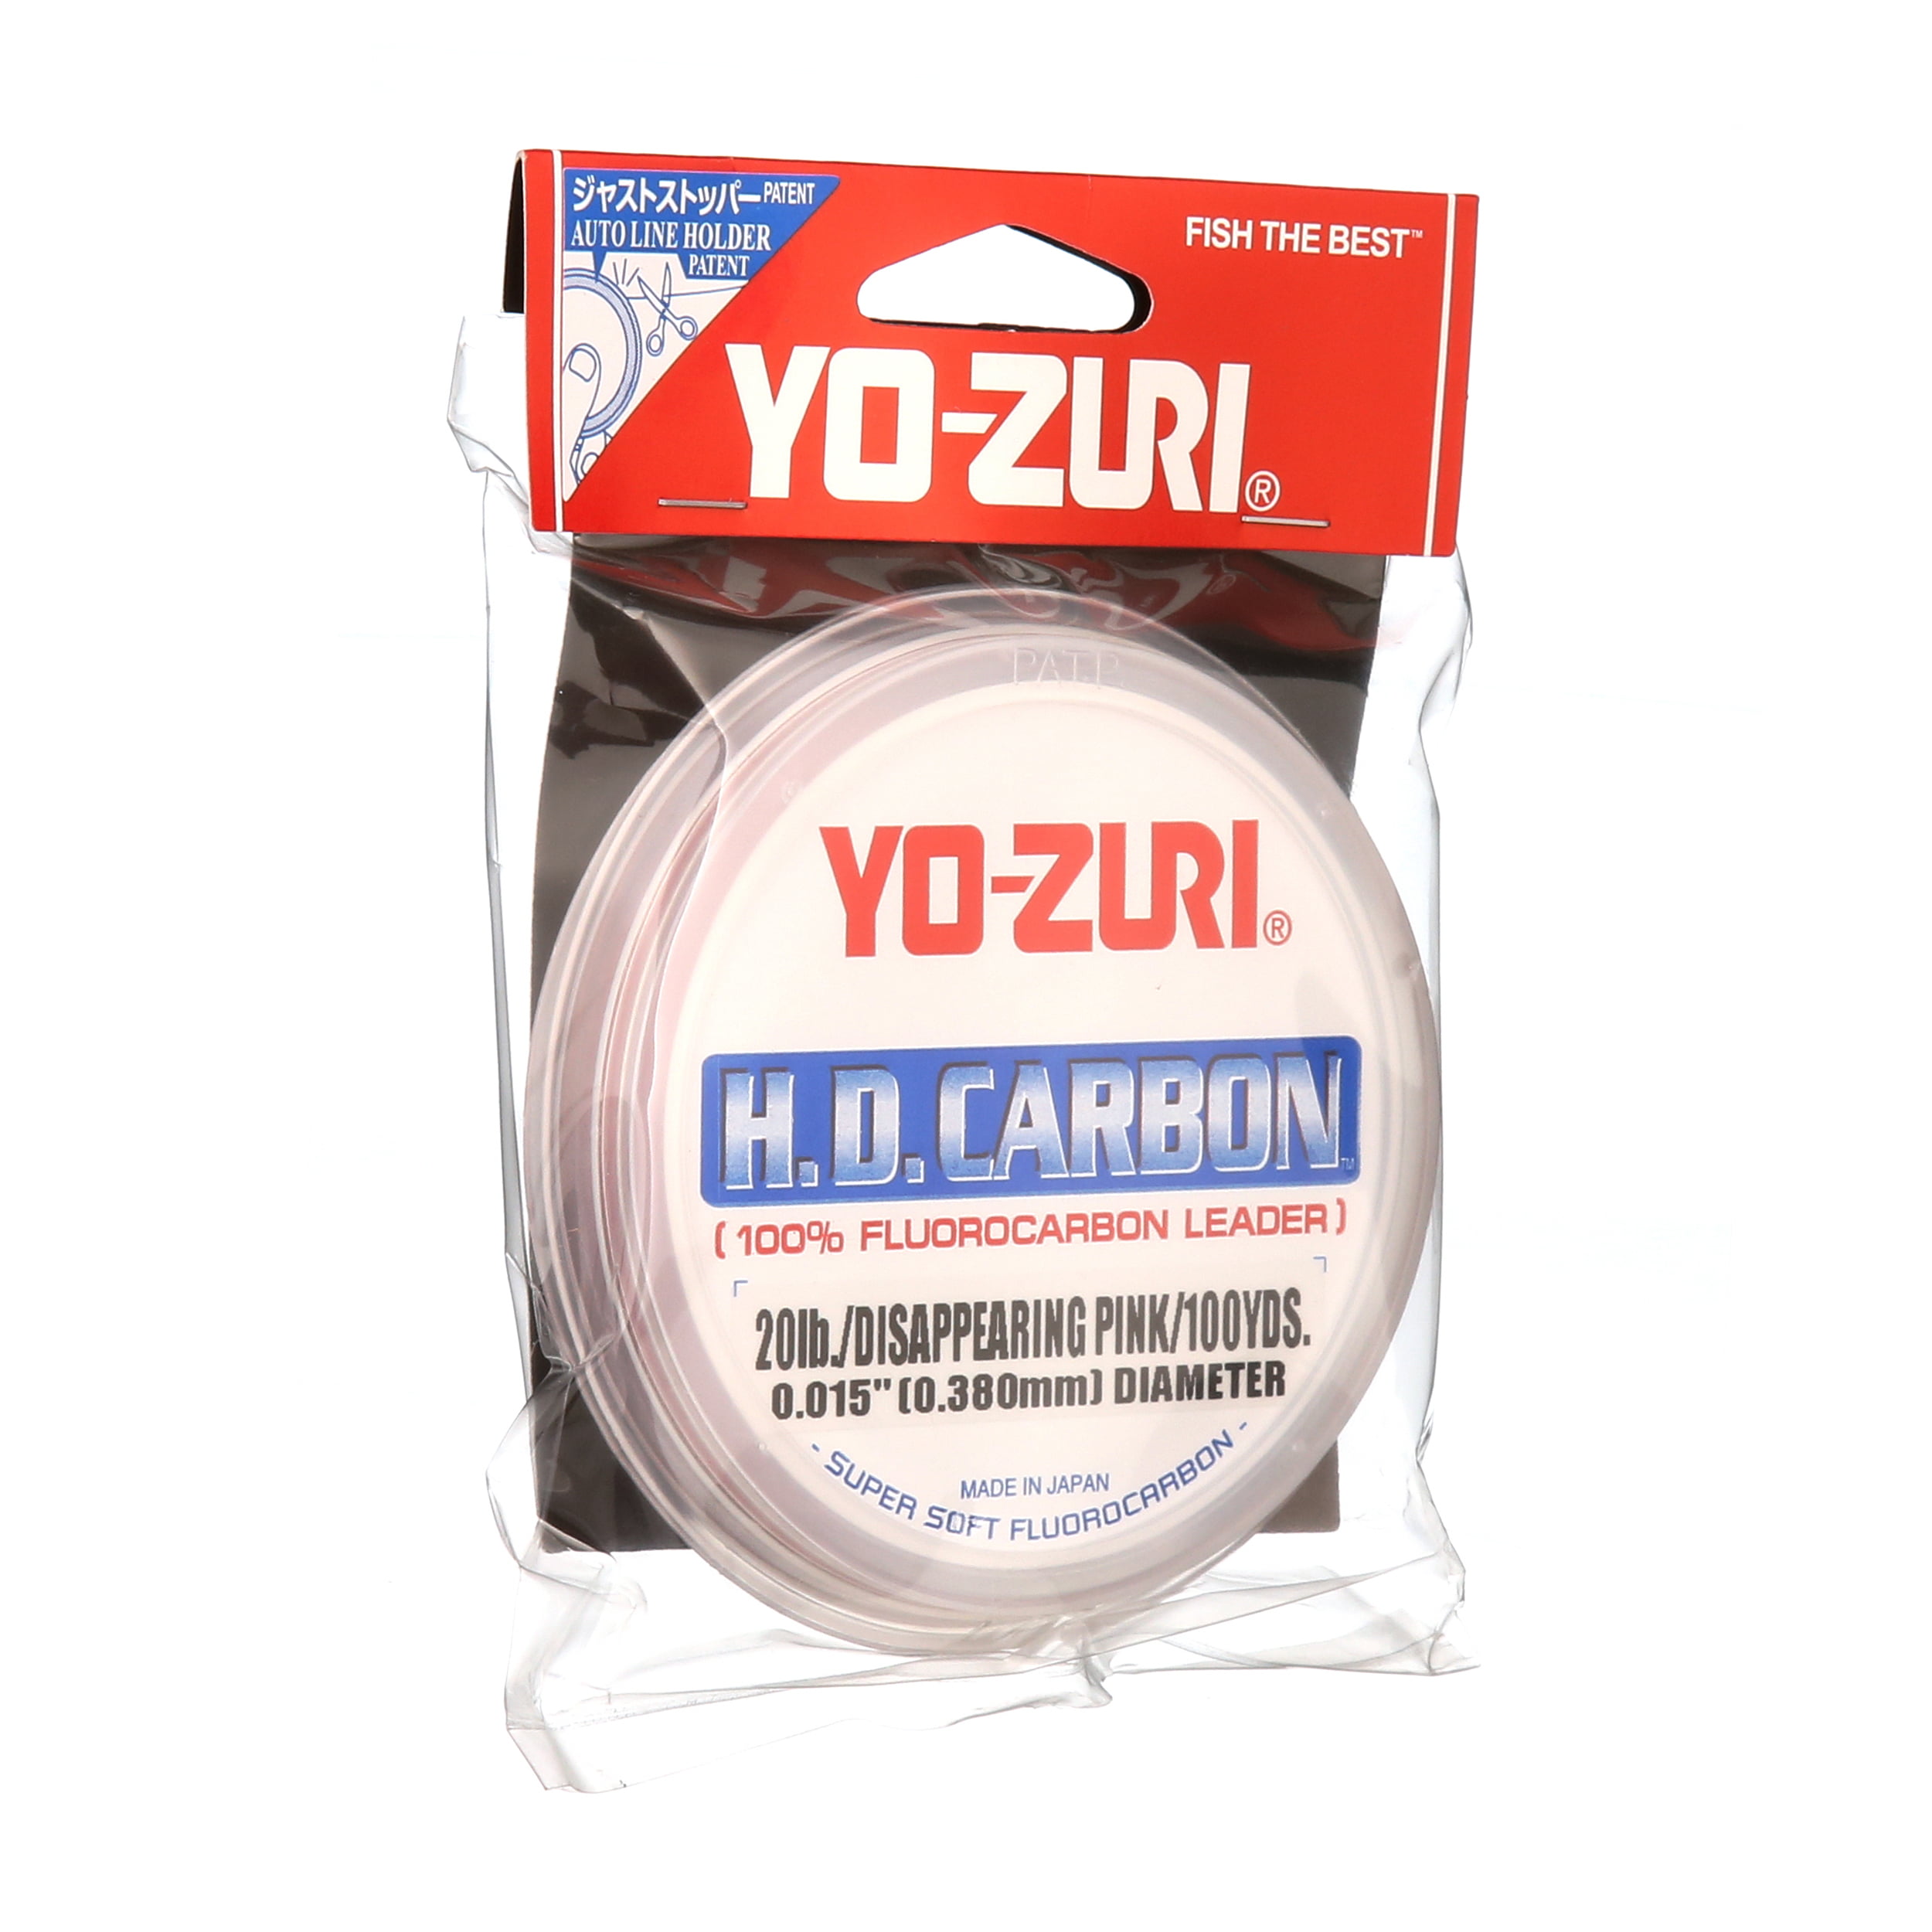 Yo-Zuri HD Carbon 30yd Disappearing Pink 100% Fluorocarbon Leader Fishing Line 